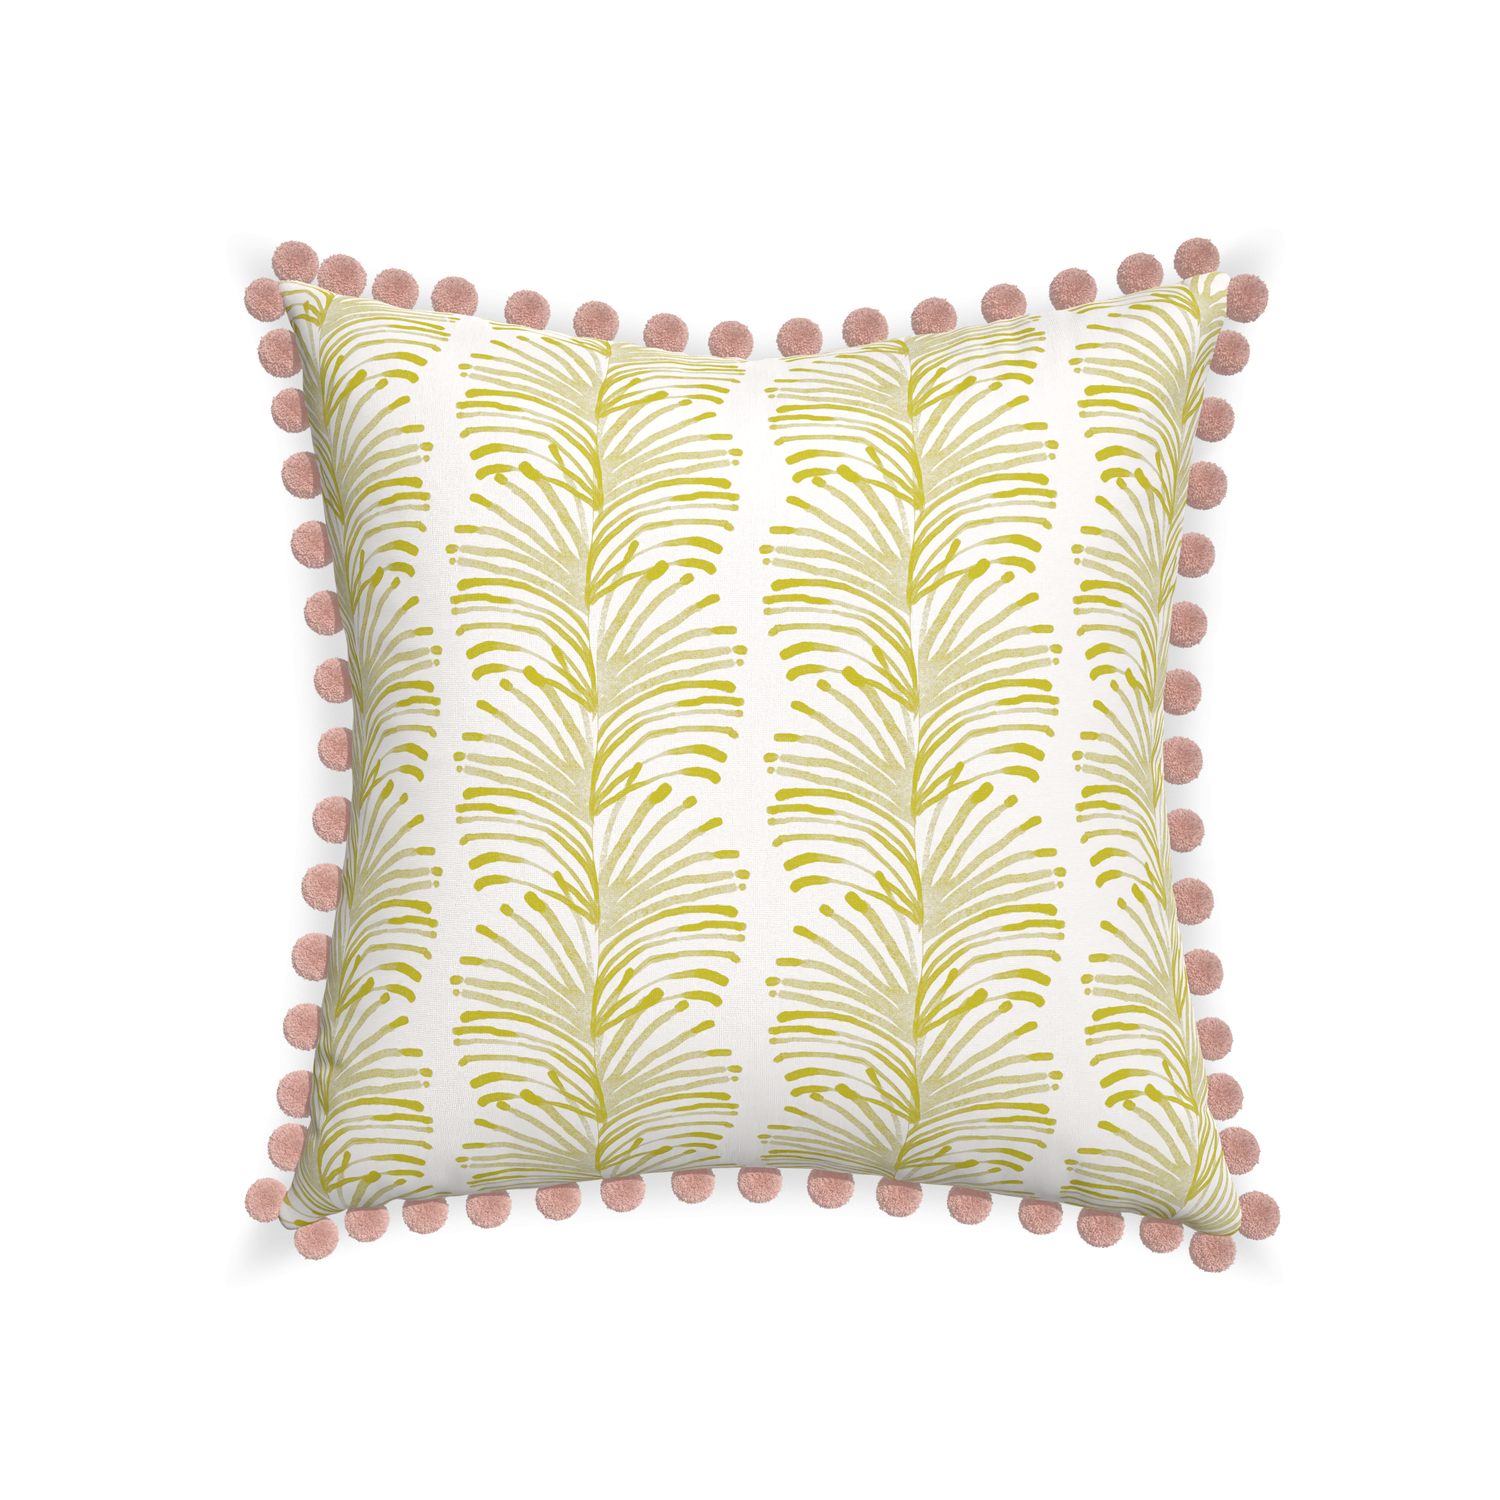 22-square emma chartreuse custom yellow stripe chartreusepillow with rose pom pom on white background